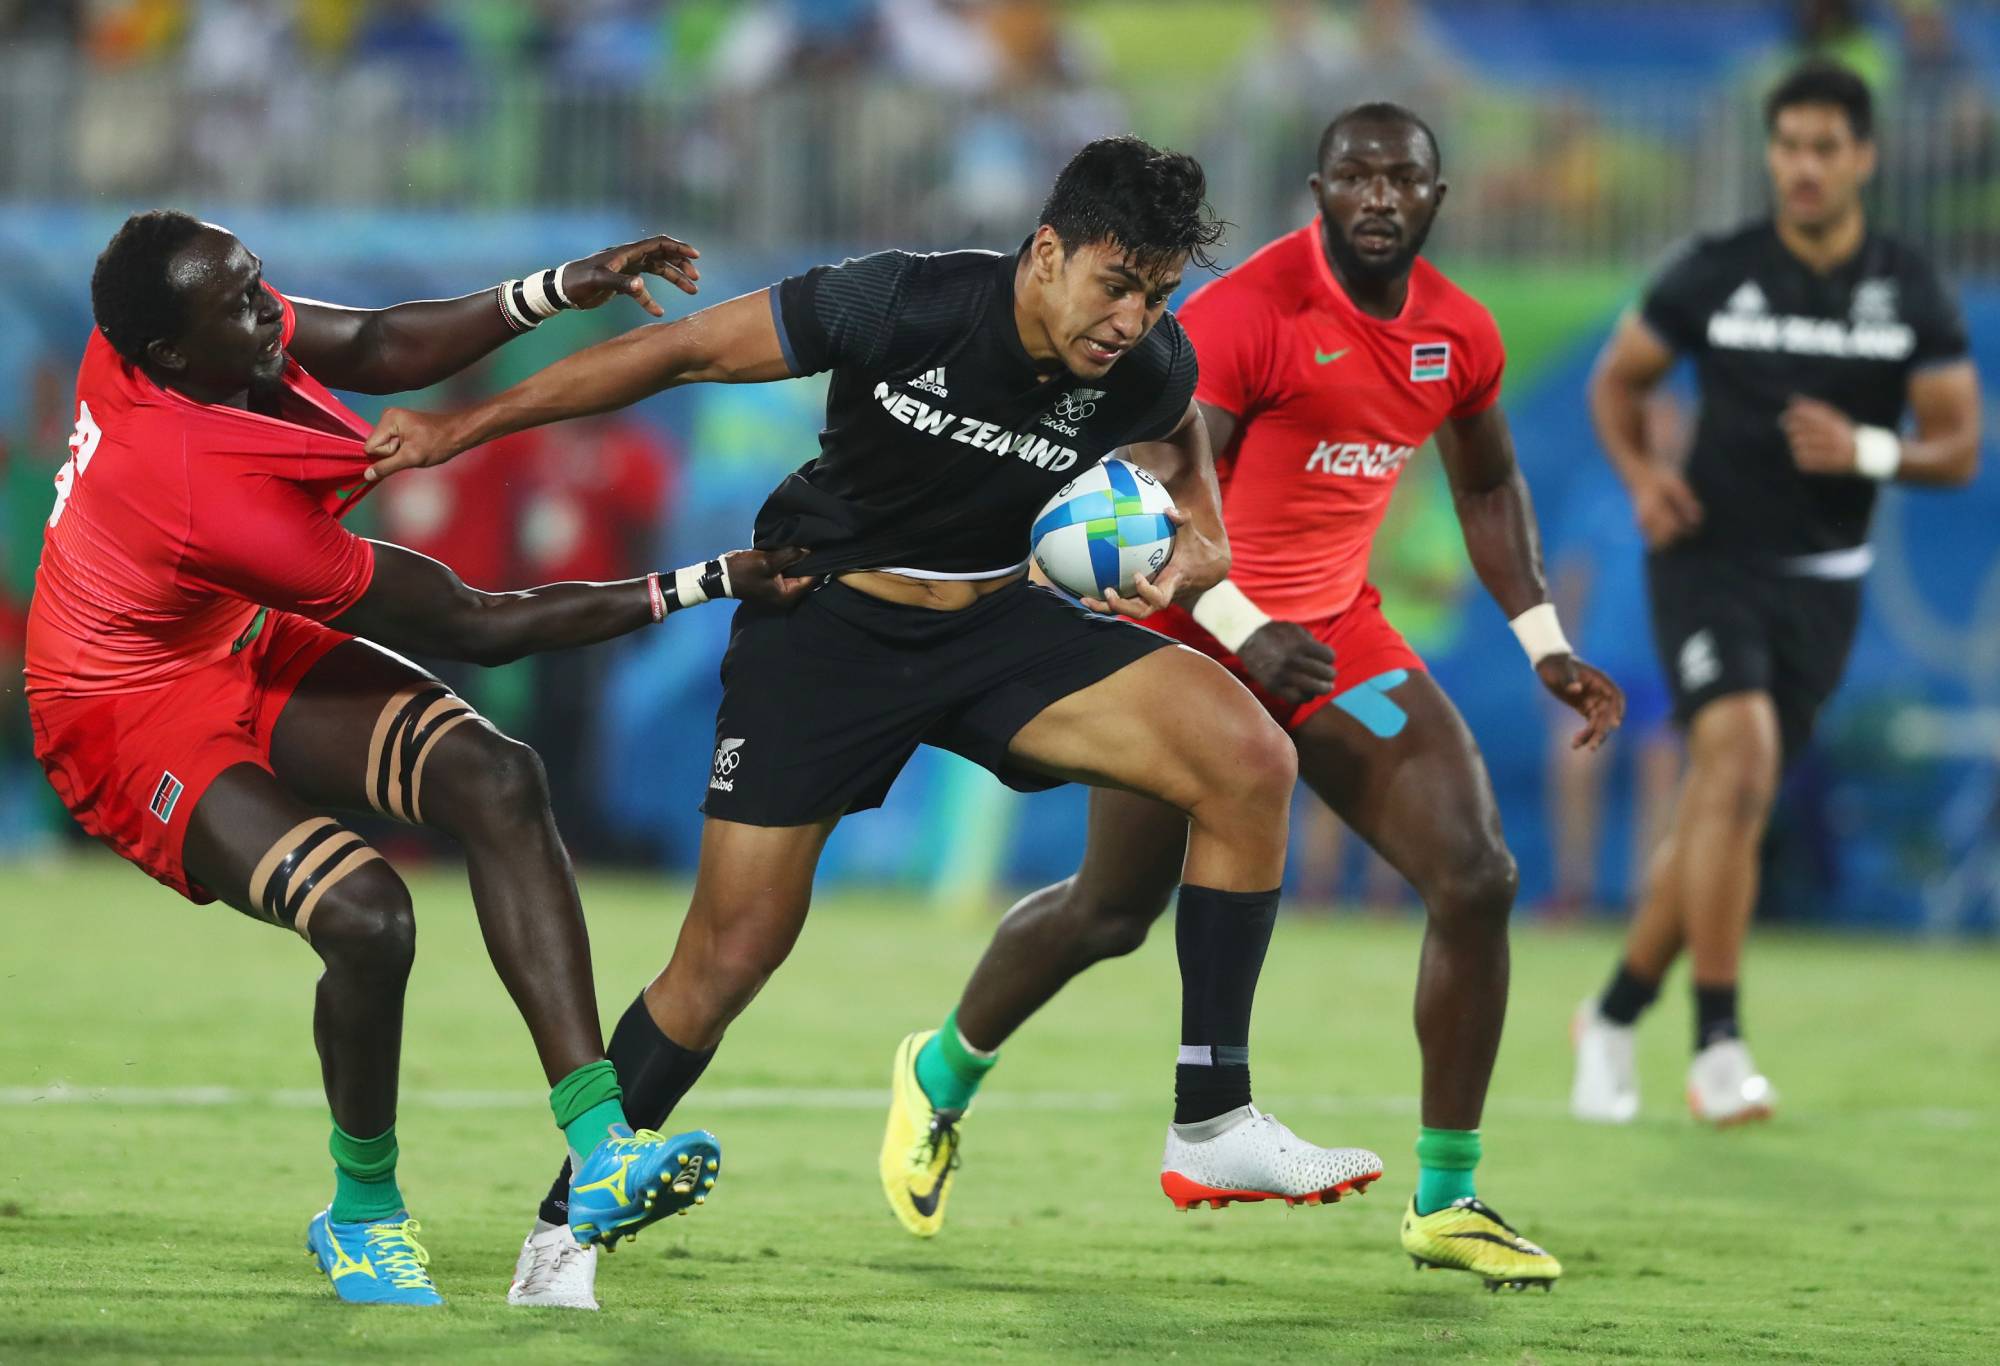  Rieko Ioane of New Zealand holds off Humphrey Kayange of Kenya during the Men's Rugby Sevens Pool C match between New Zealand and Kenya on Day 4 of the Rio 2016 Olympic Games at Deodoro Stadium on August 9, 2016 in Rio de Janeiro, Brazil. (Photo by David Rogers/Getty Images)